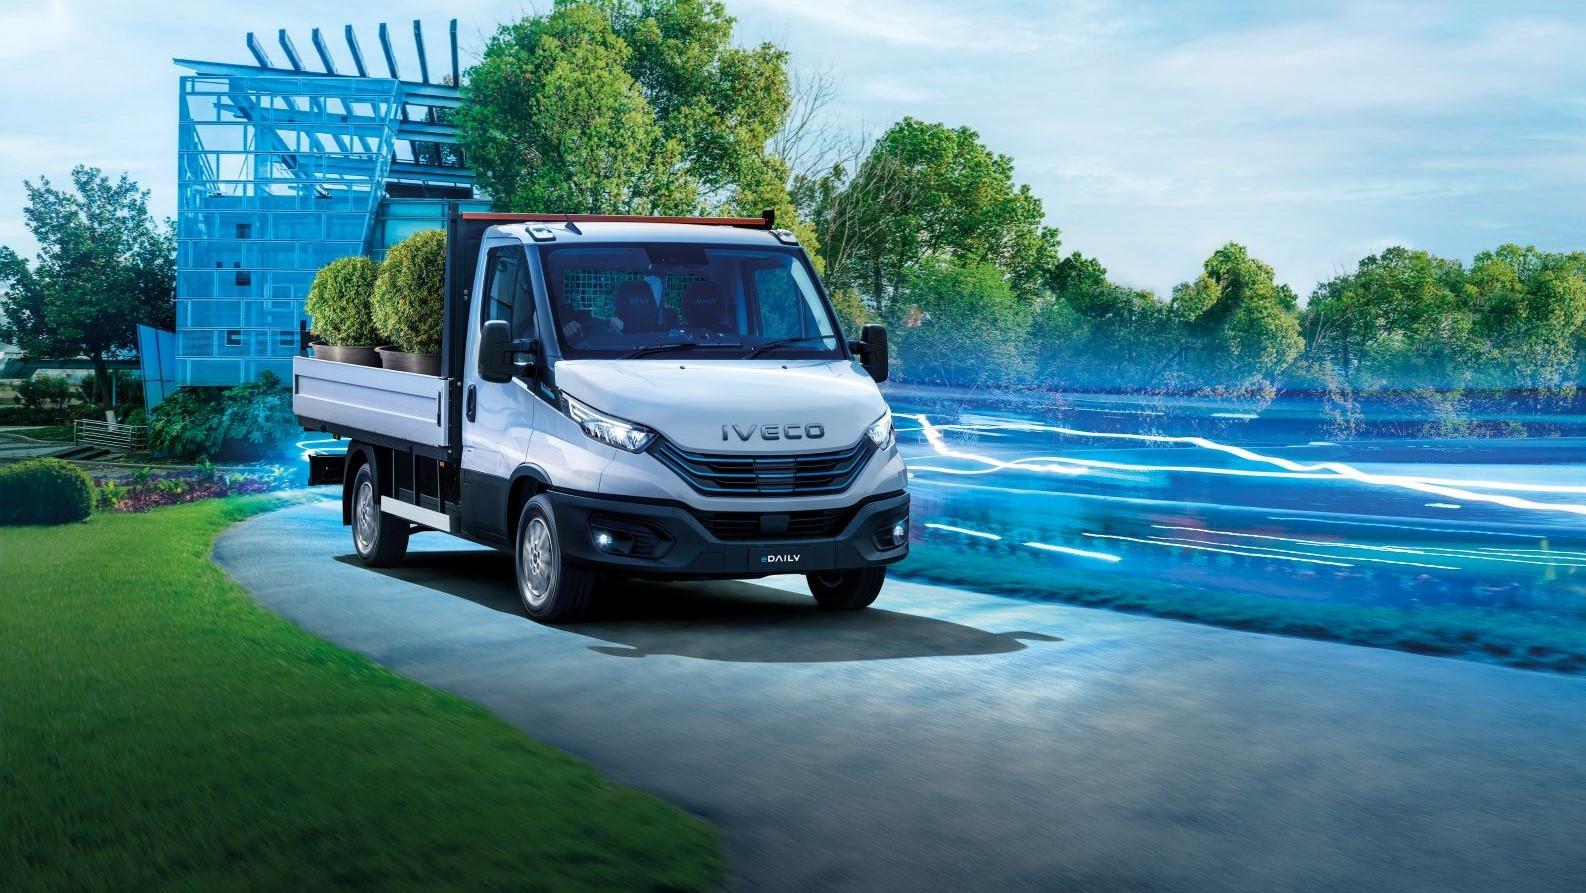 IVECO eDaily wins first Neomotor “Commercial Vehicle of the Year” Award